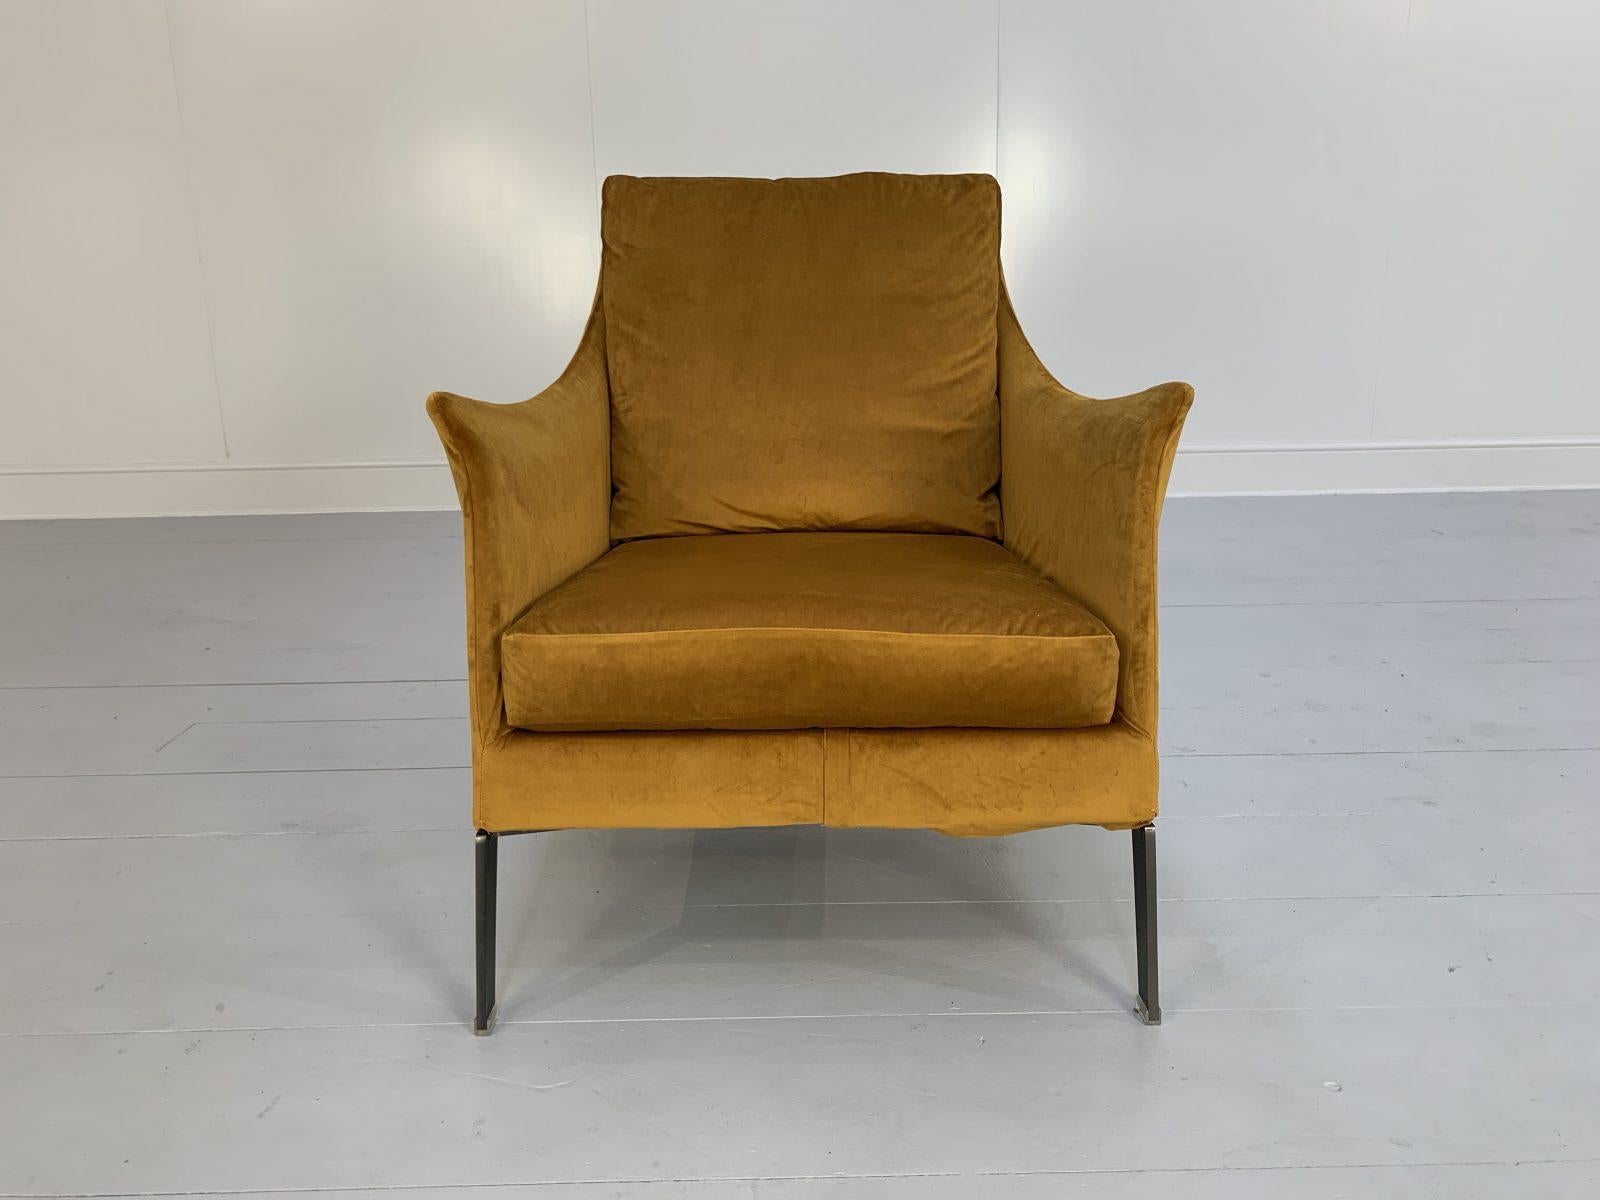 This is a rare, immaculately presented “Boss” Armchair from the world renown Italian furniture house of Flexform, dressed in a sublime modern, short-pile velvet in Saffron Gold.

In a world of temporary pleasures, Flexform create beautiful